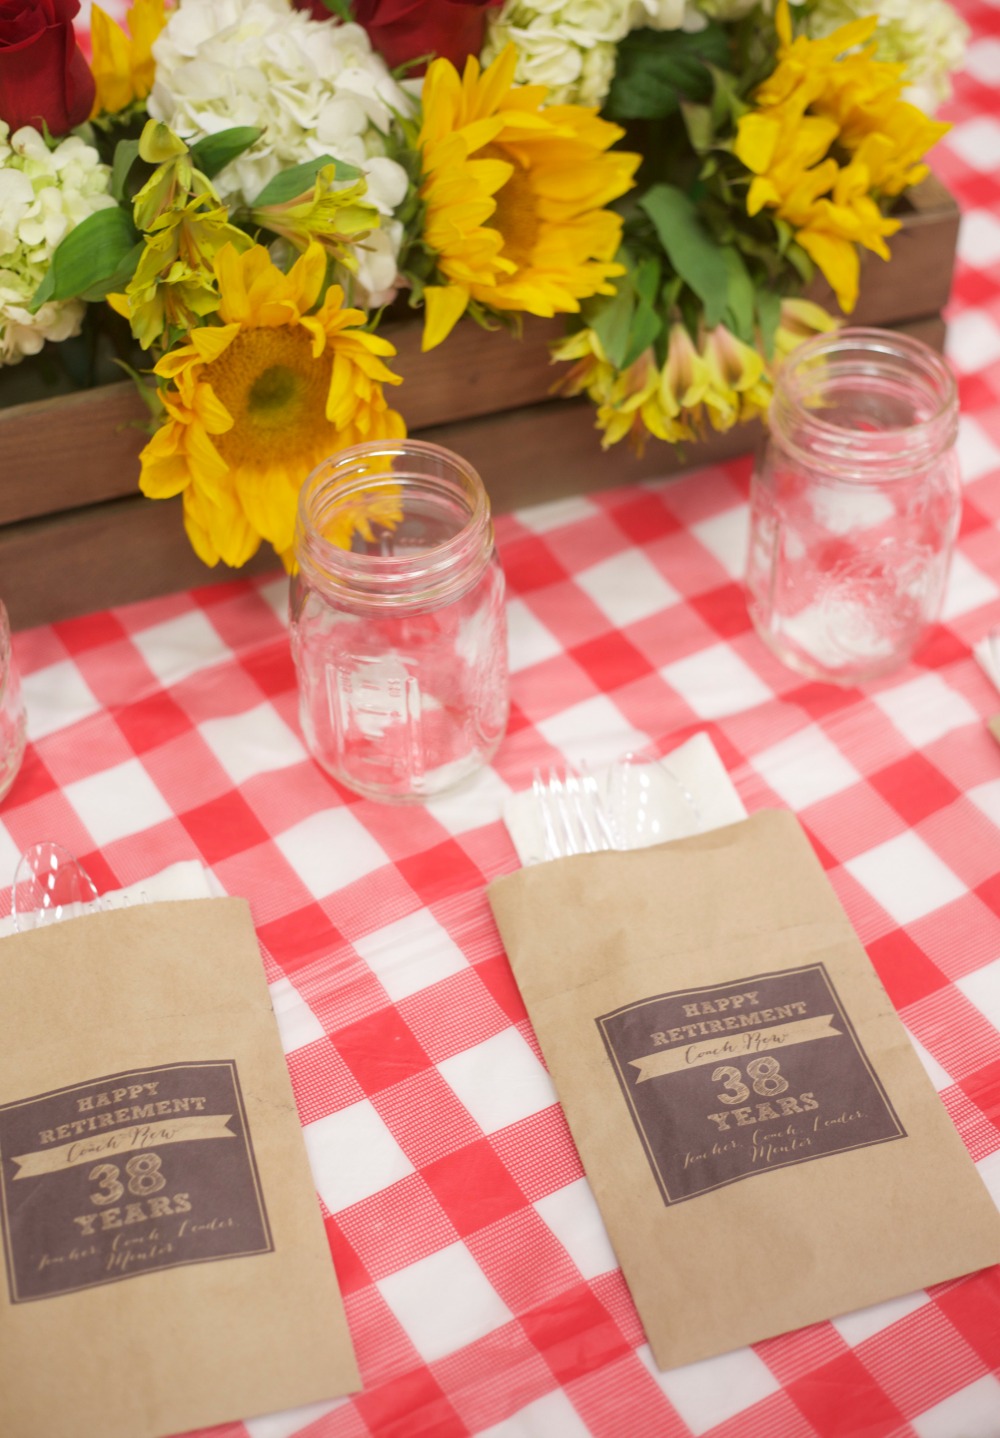 BBQ Retirement Party by PartiesforPennies.com | Picnic, Cookout, Red Gingham, Sunflowers, Placesetting, Paper Bag,